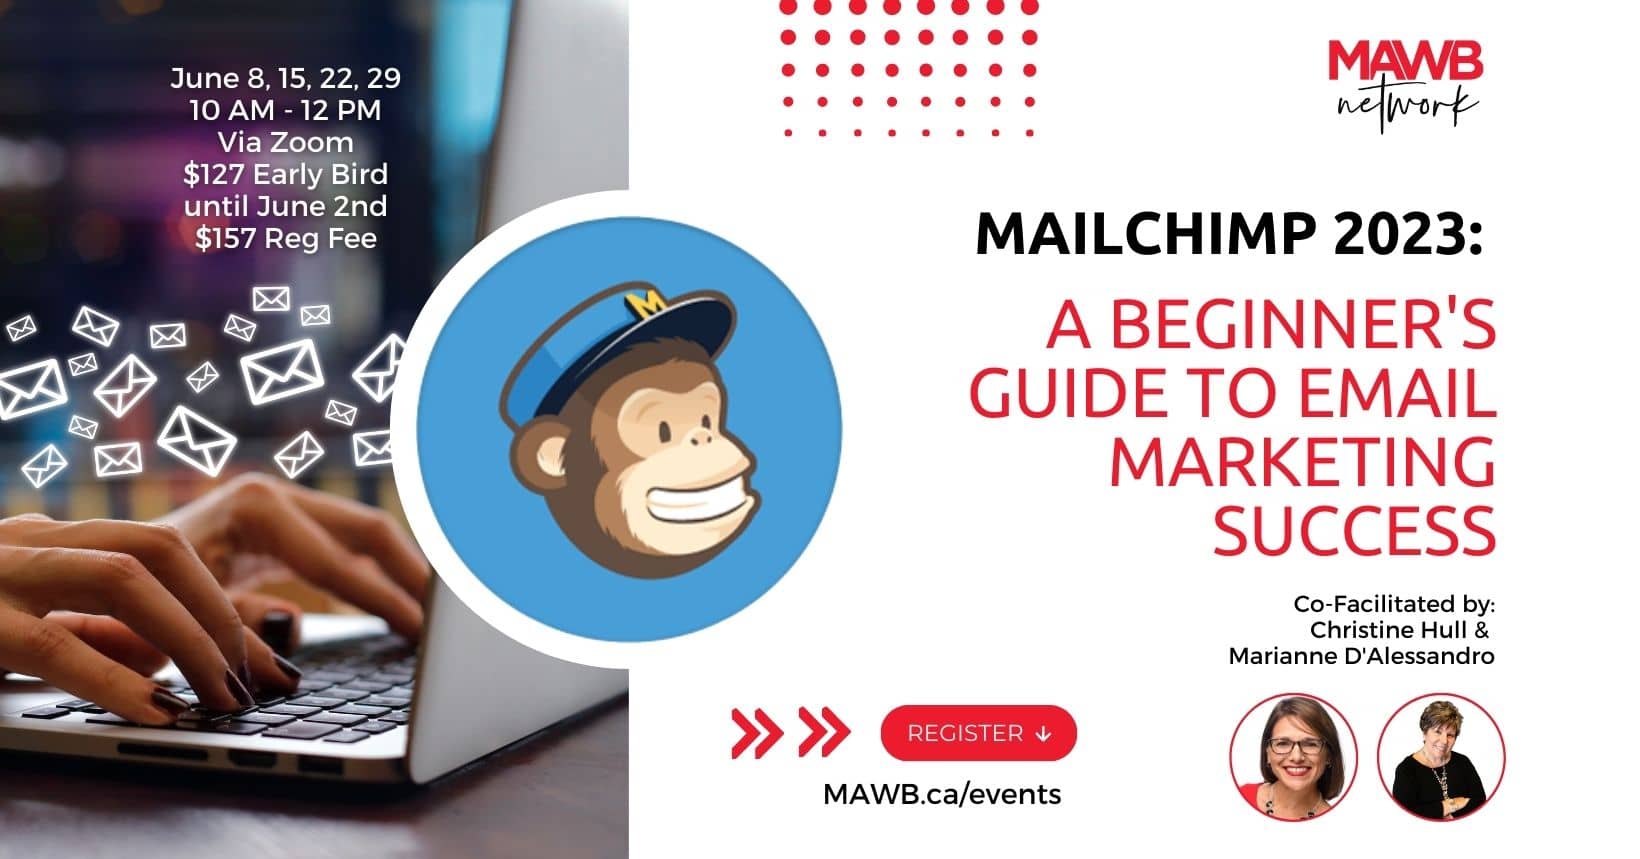 MAWB - MailChimp 2023: A Beginner's Guide to Email Marketing Success